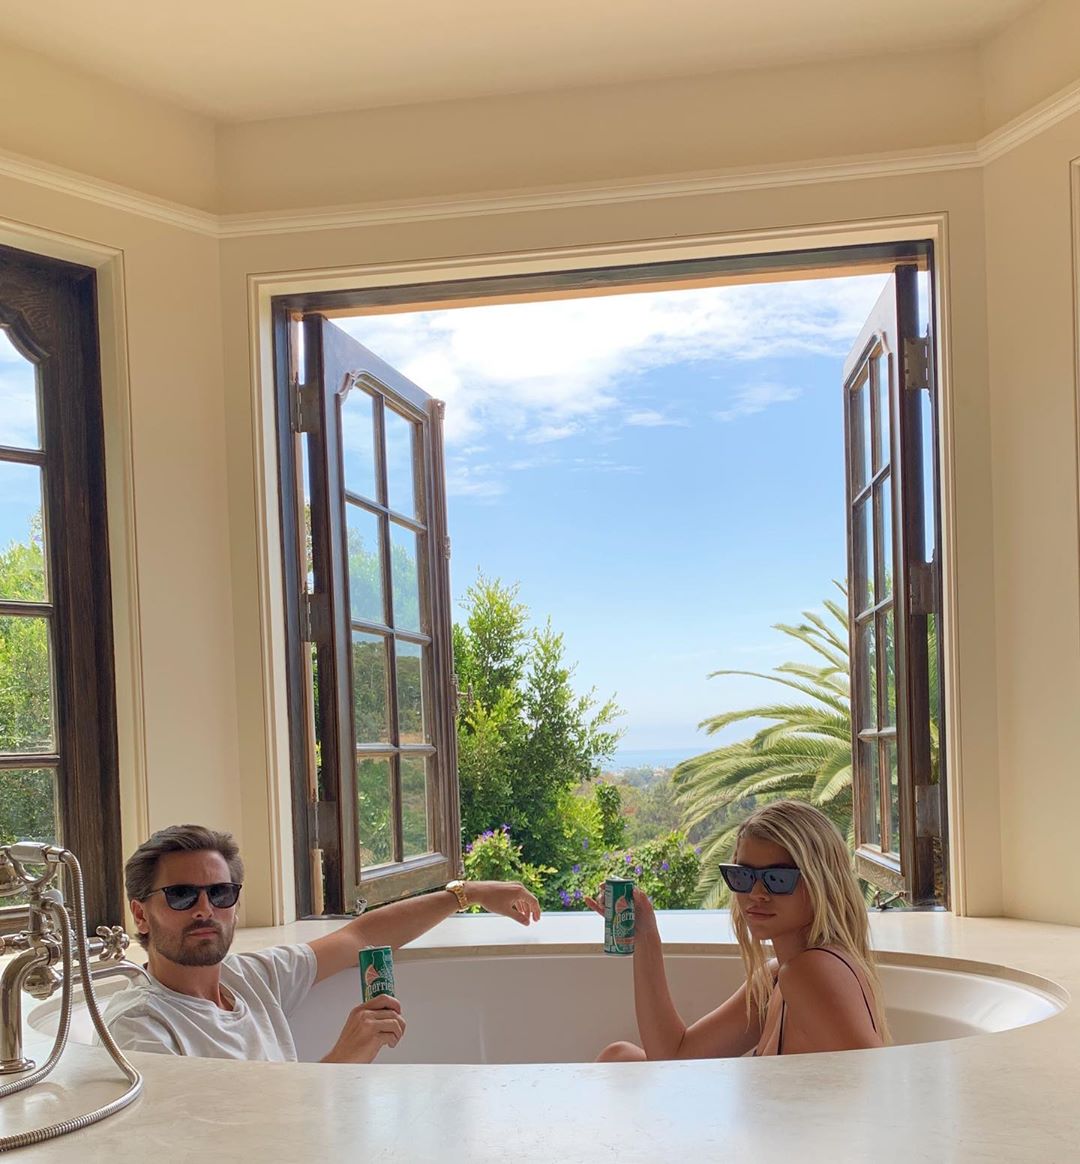 Photos from Scott Disick and Sofia Richie's Jet Set Year in Photos